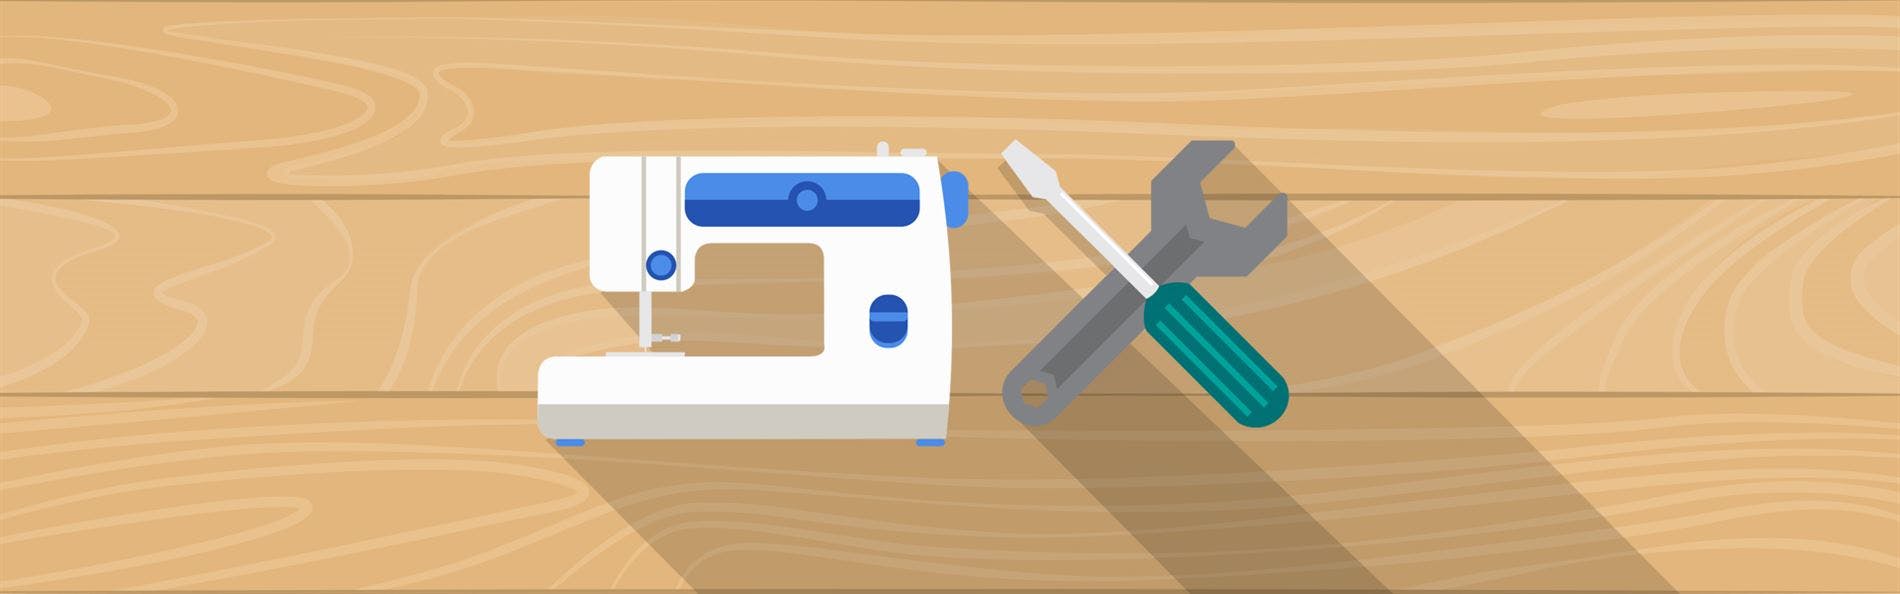 Sewing machine repair and service banner